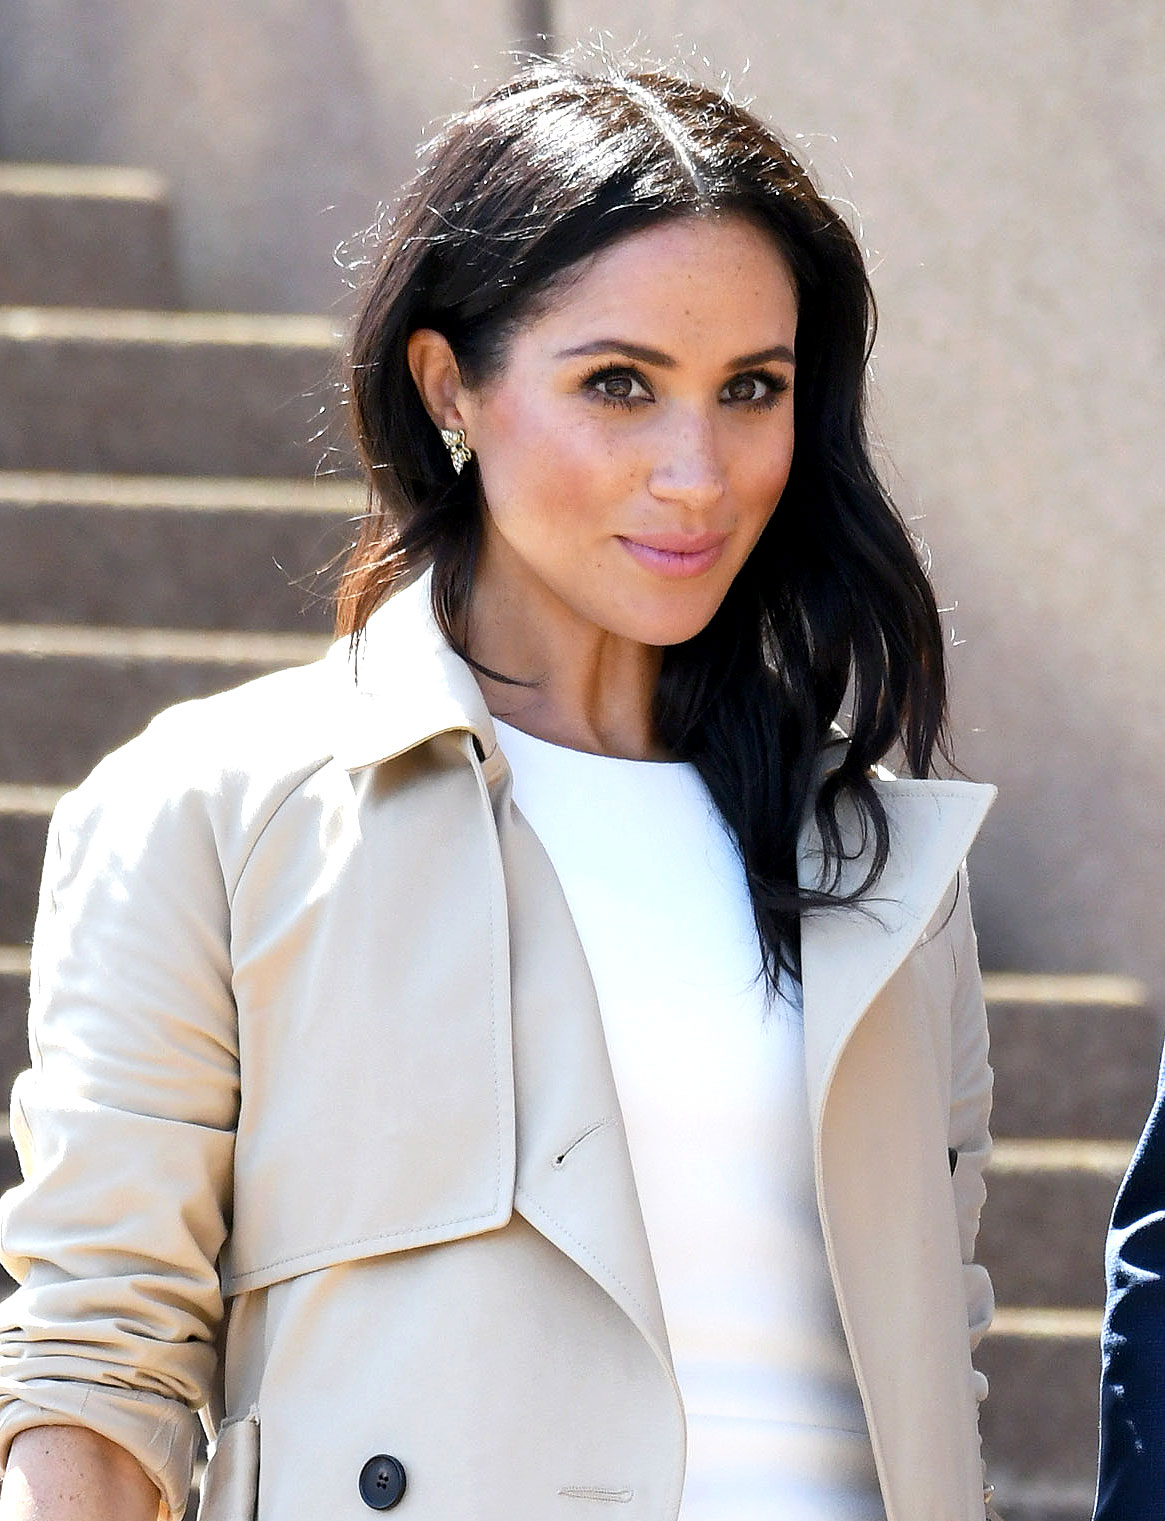 Get Tressed With Us': Meghan Markle Pregnancy Hair Color, Beauty